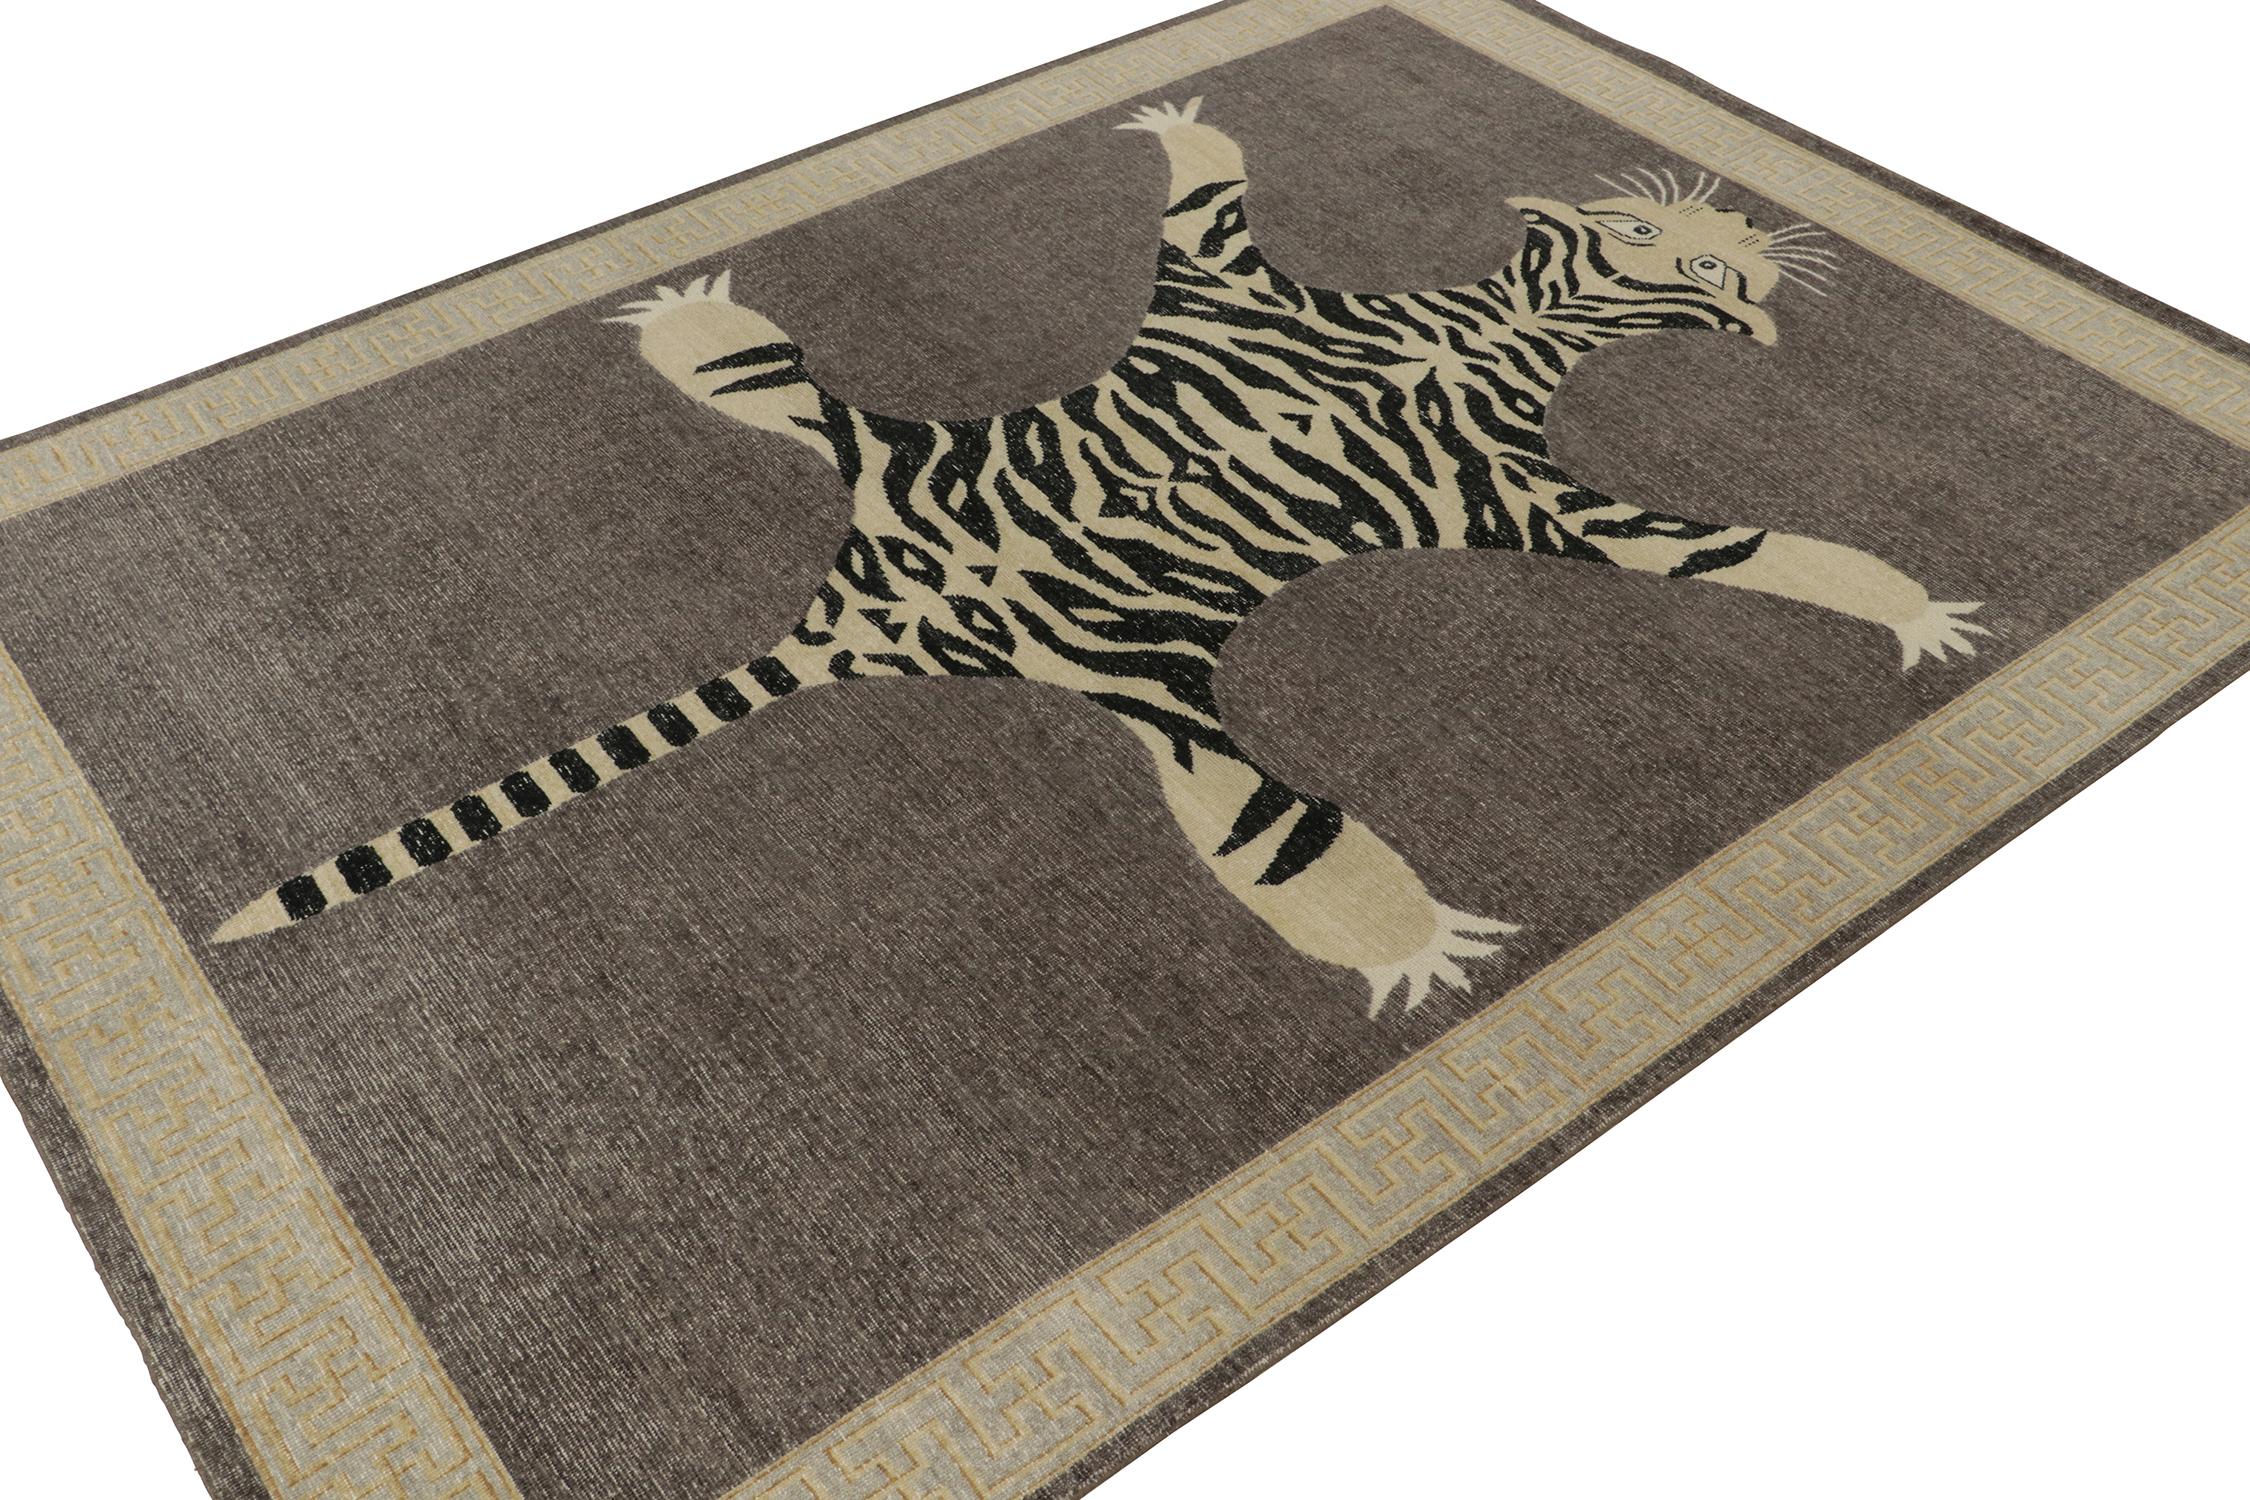 This hand-knotted wool 9x12 rug from Rug & Kilim’s Homage Collection recaptures the time-honored Tiger skin rug style.

Further On the Design: 

This particular piece is inspired by antique Indian Tiger-skin rugs of the most regal, graphic